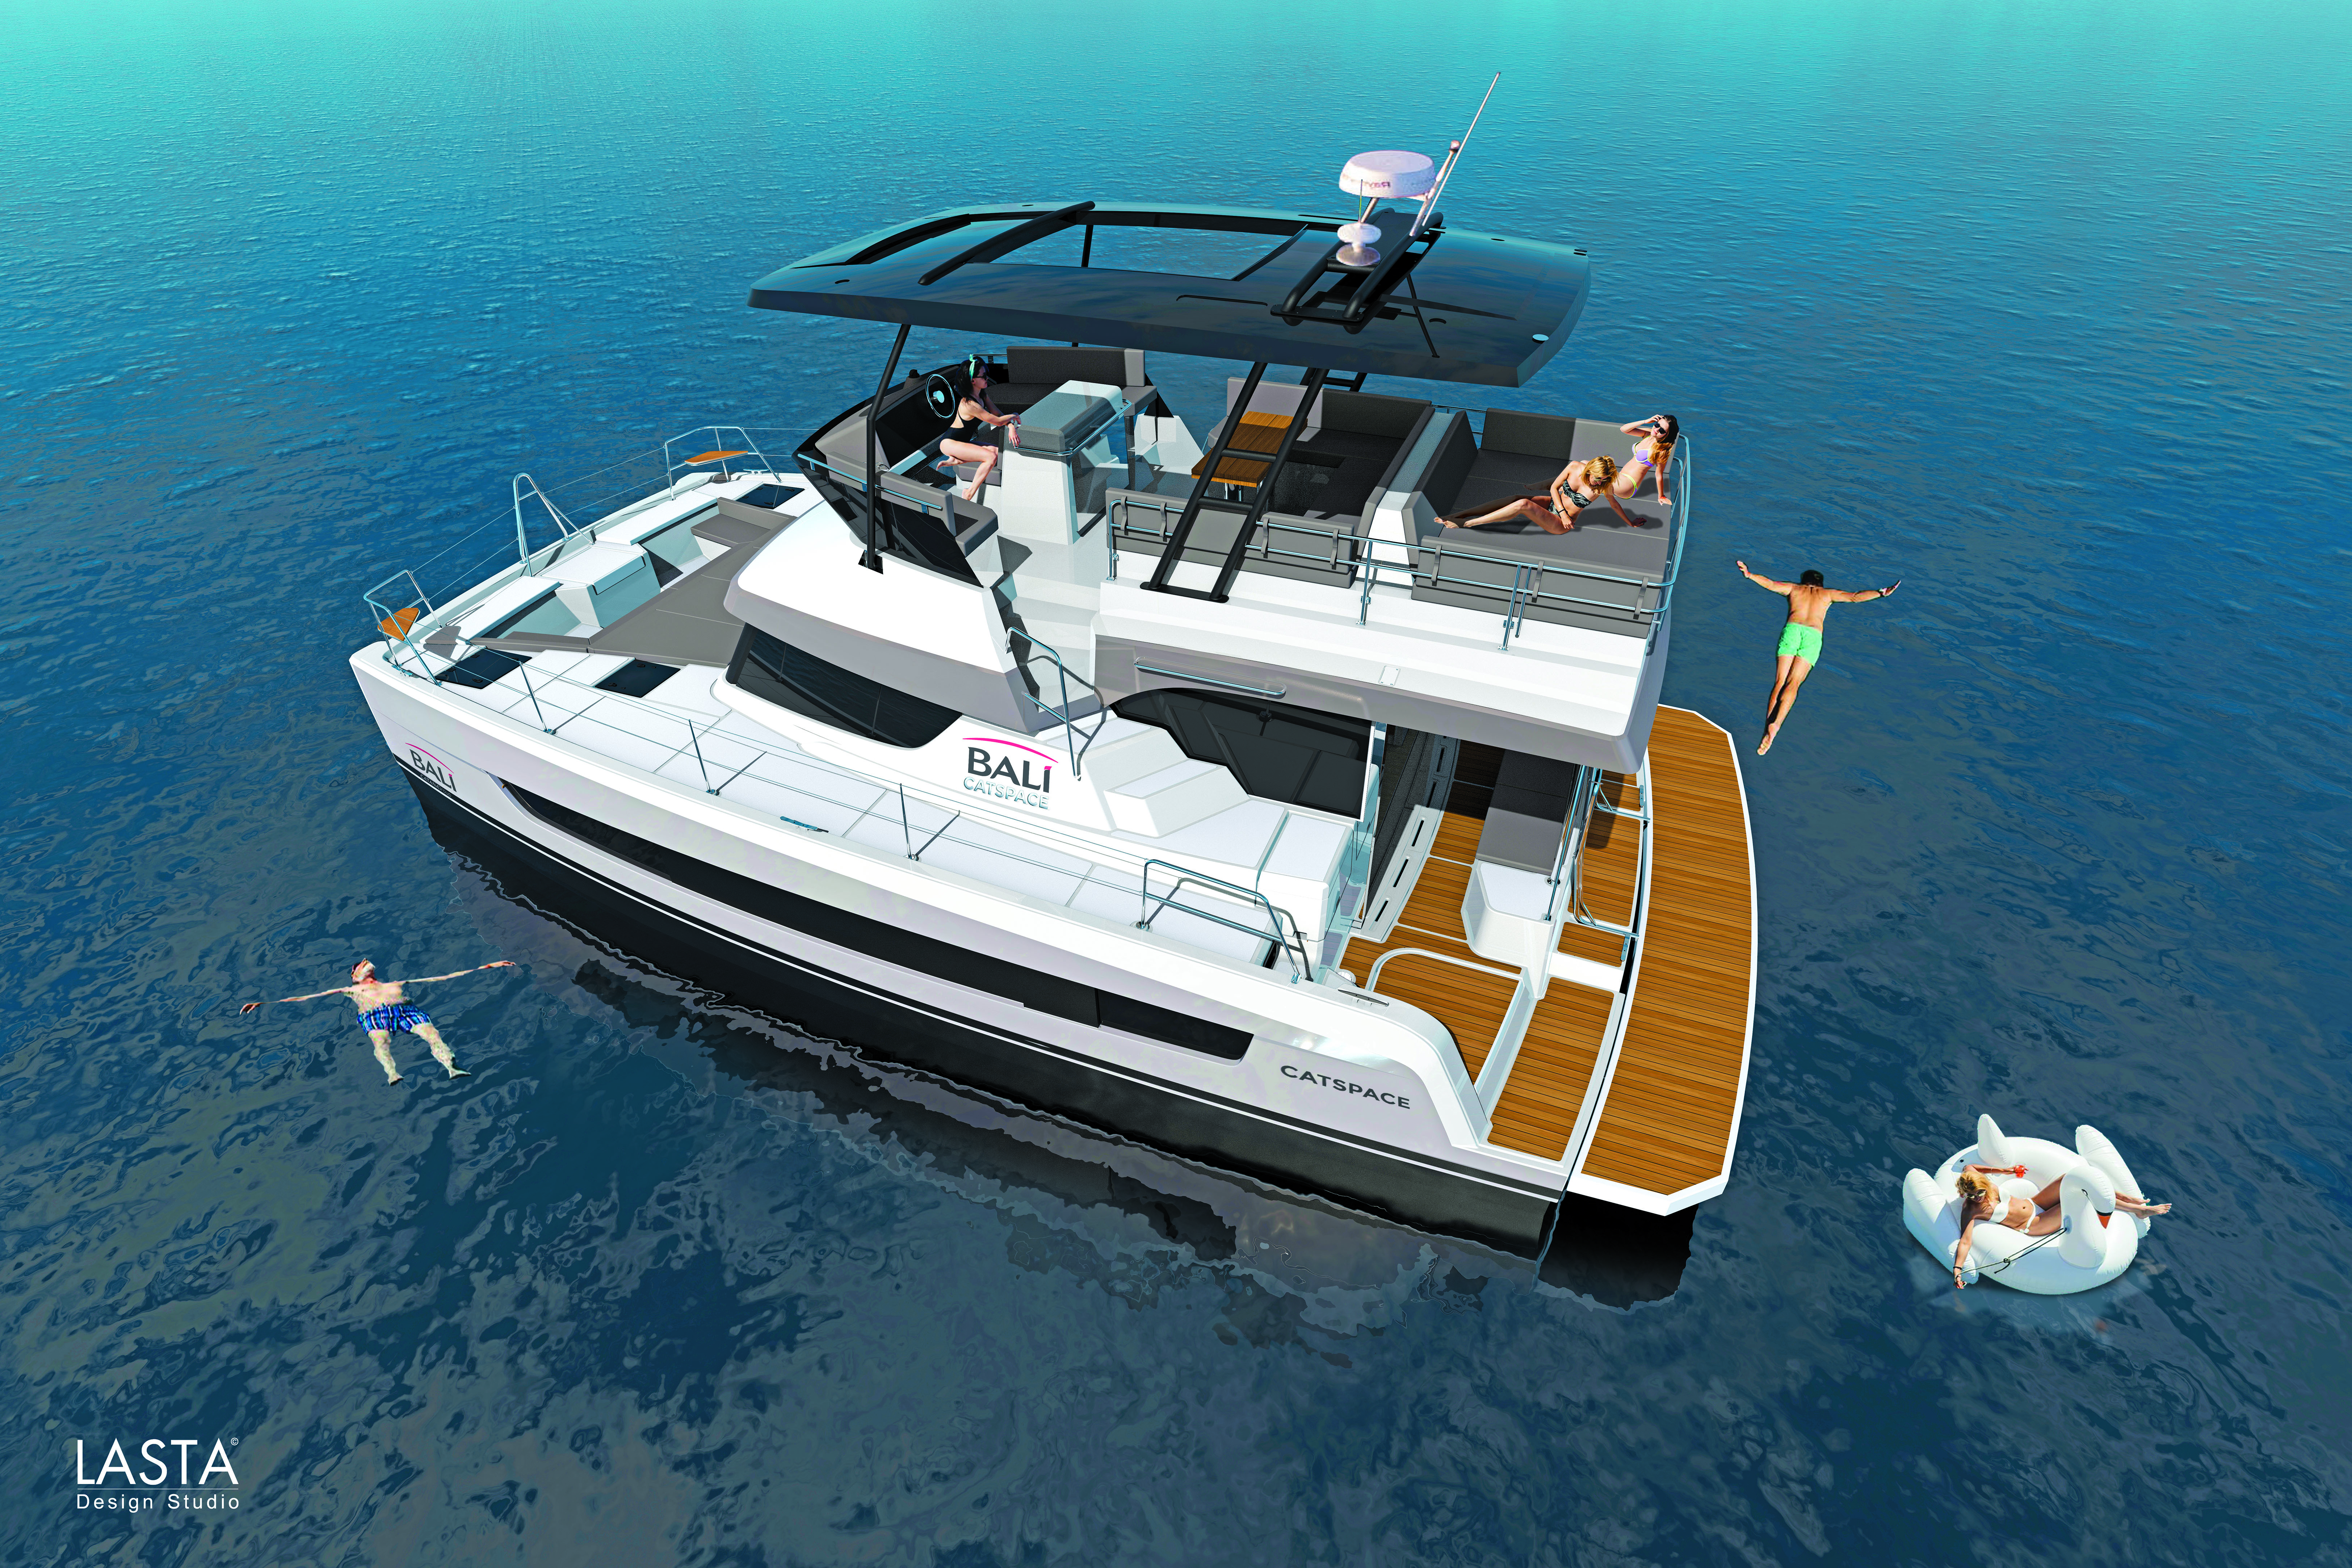 Catamaran BALI CATSPACE MY - pictures, plans and features